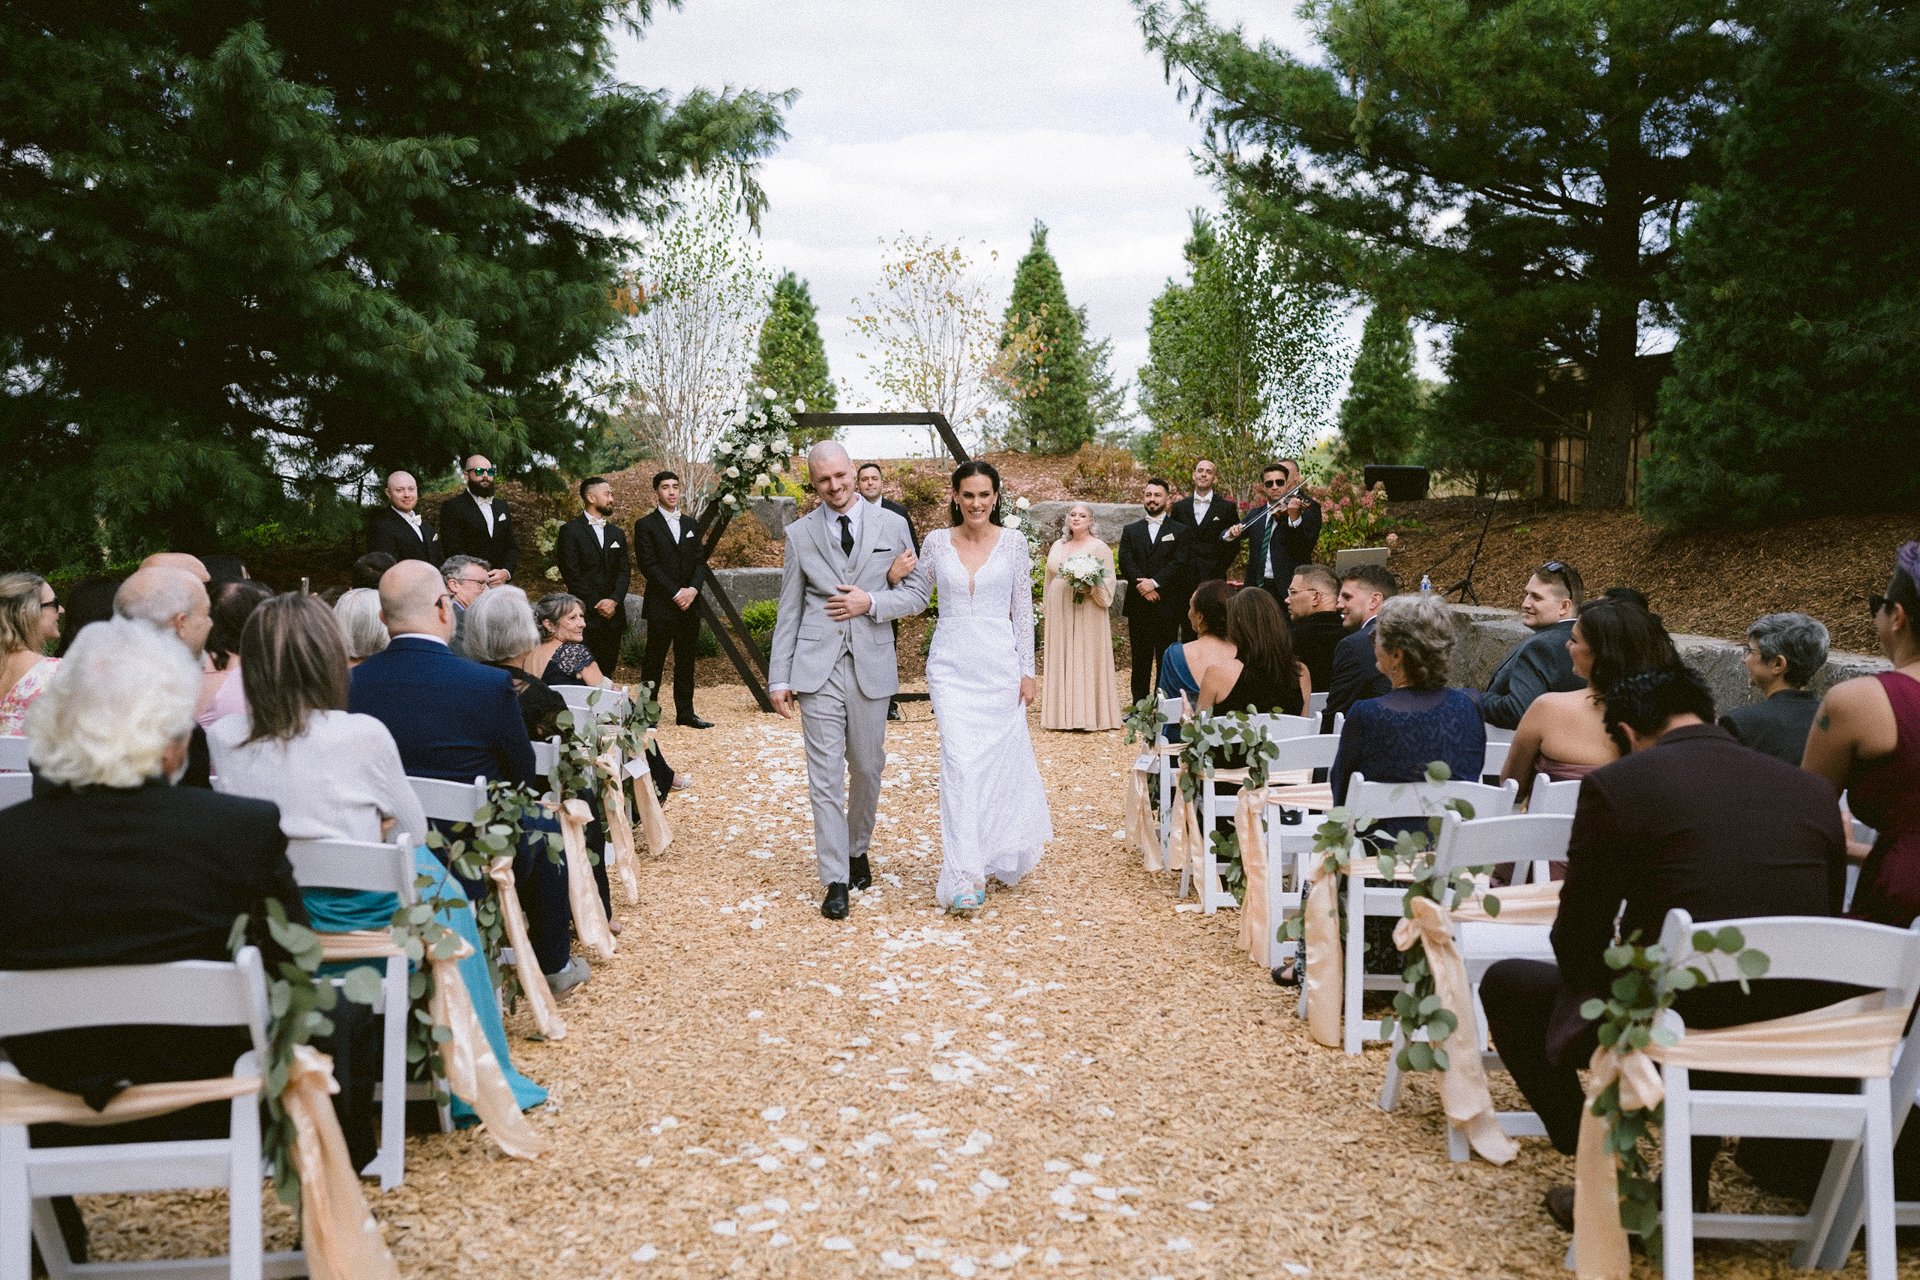 Newlyweds joyfully exiting Cambium Farms ceremony with their guests as witnesses.